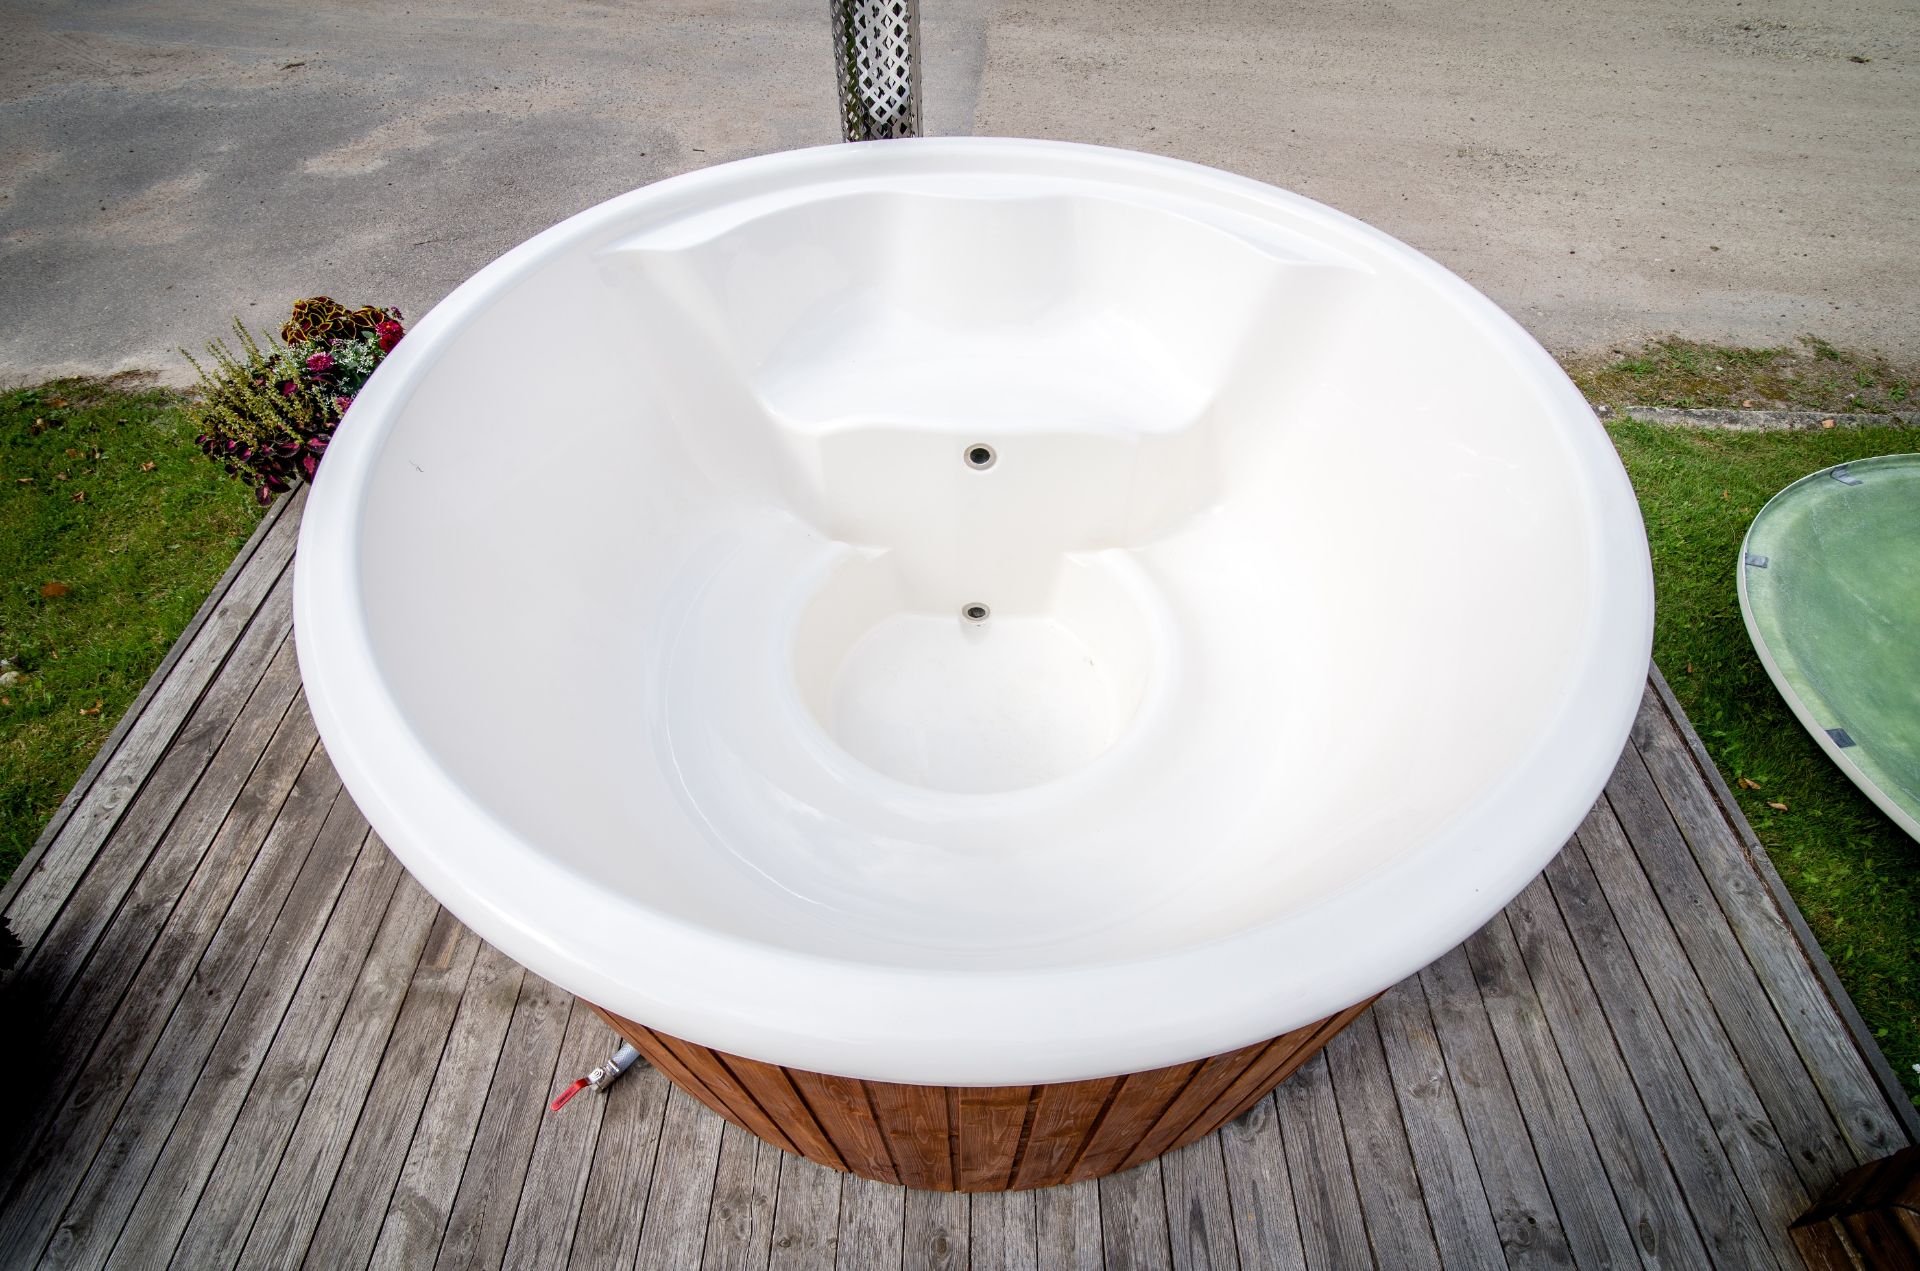 V Brand New Luxurious Extra Large Thermo Wood 1.8m Hot Tub With Air Bubble & Hydro Massage - Image 4 of 4